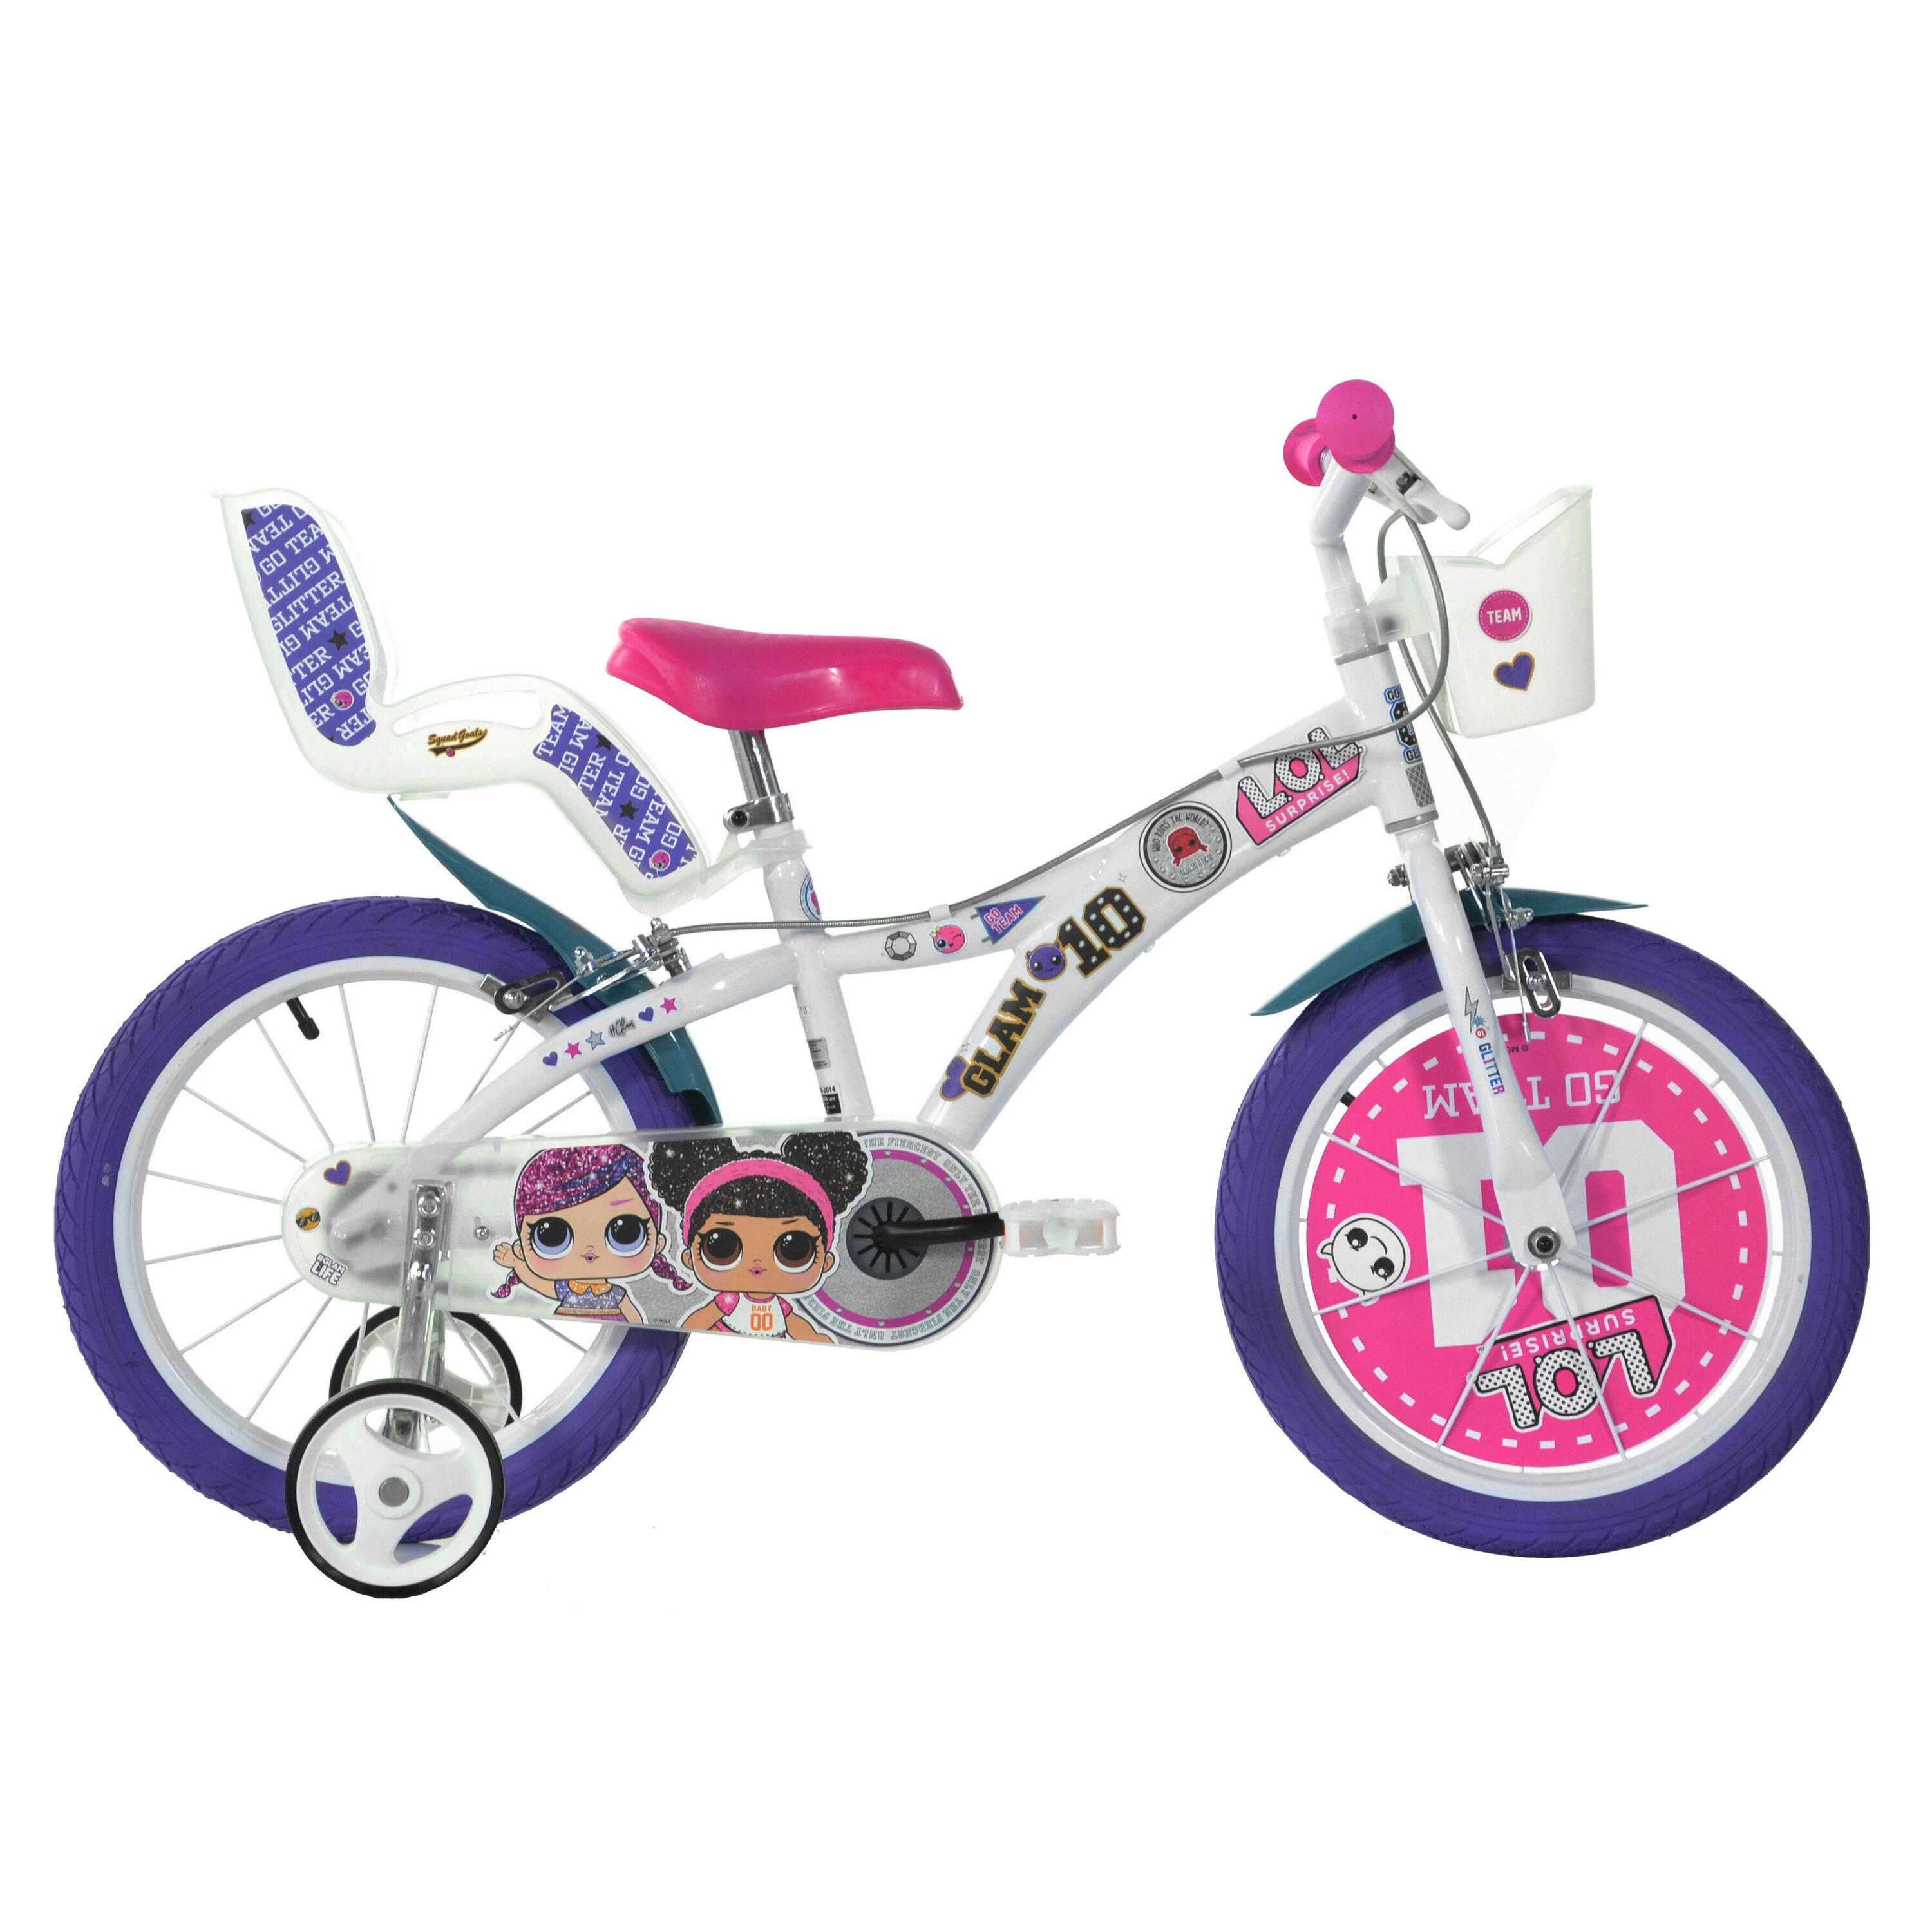 L.O.L Surprise! 16" Bikes with Removable Stabilisers 1/5